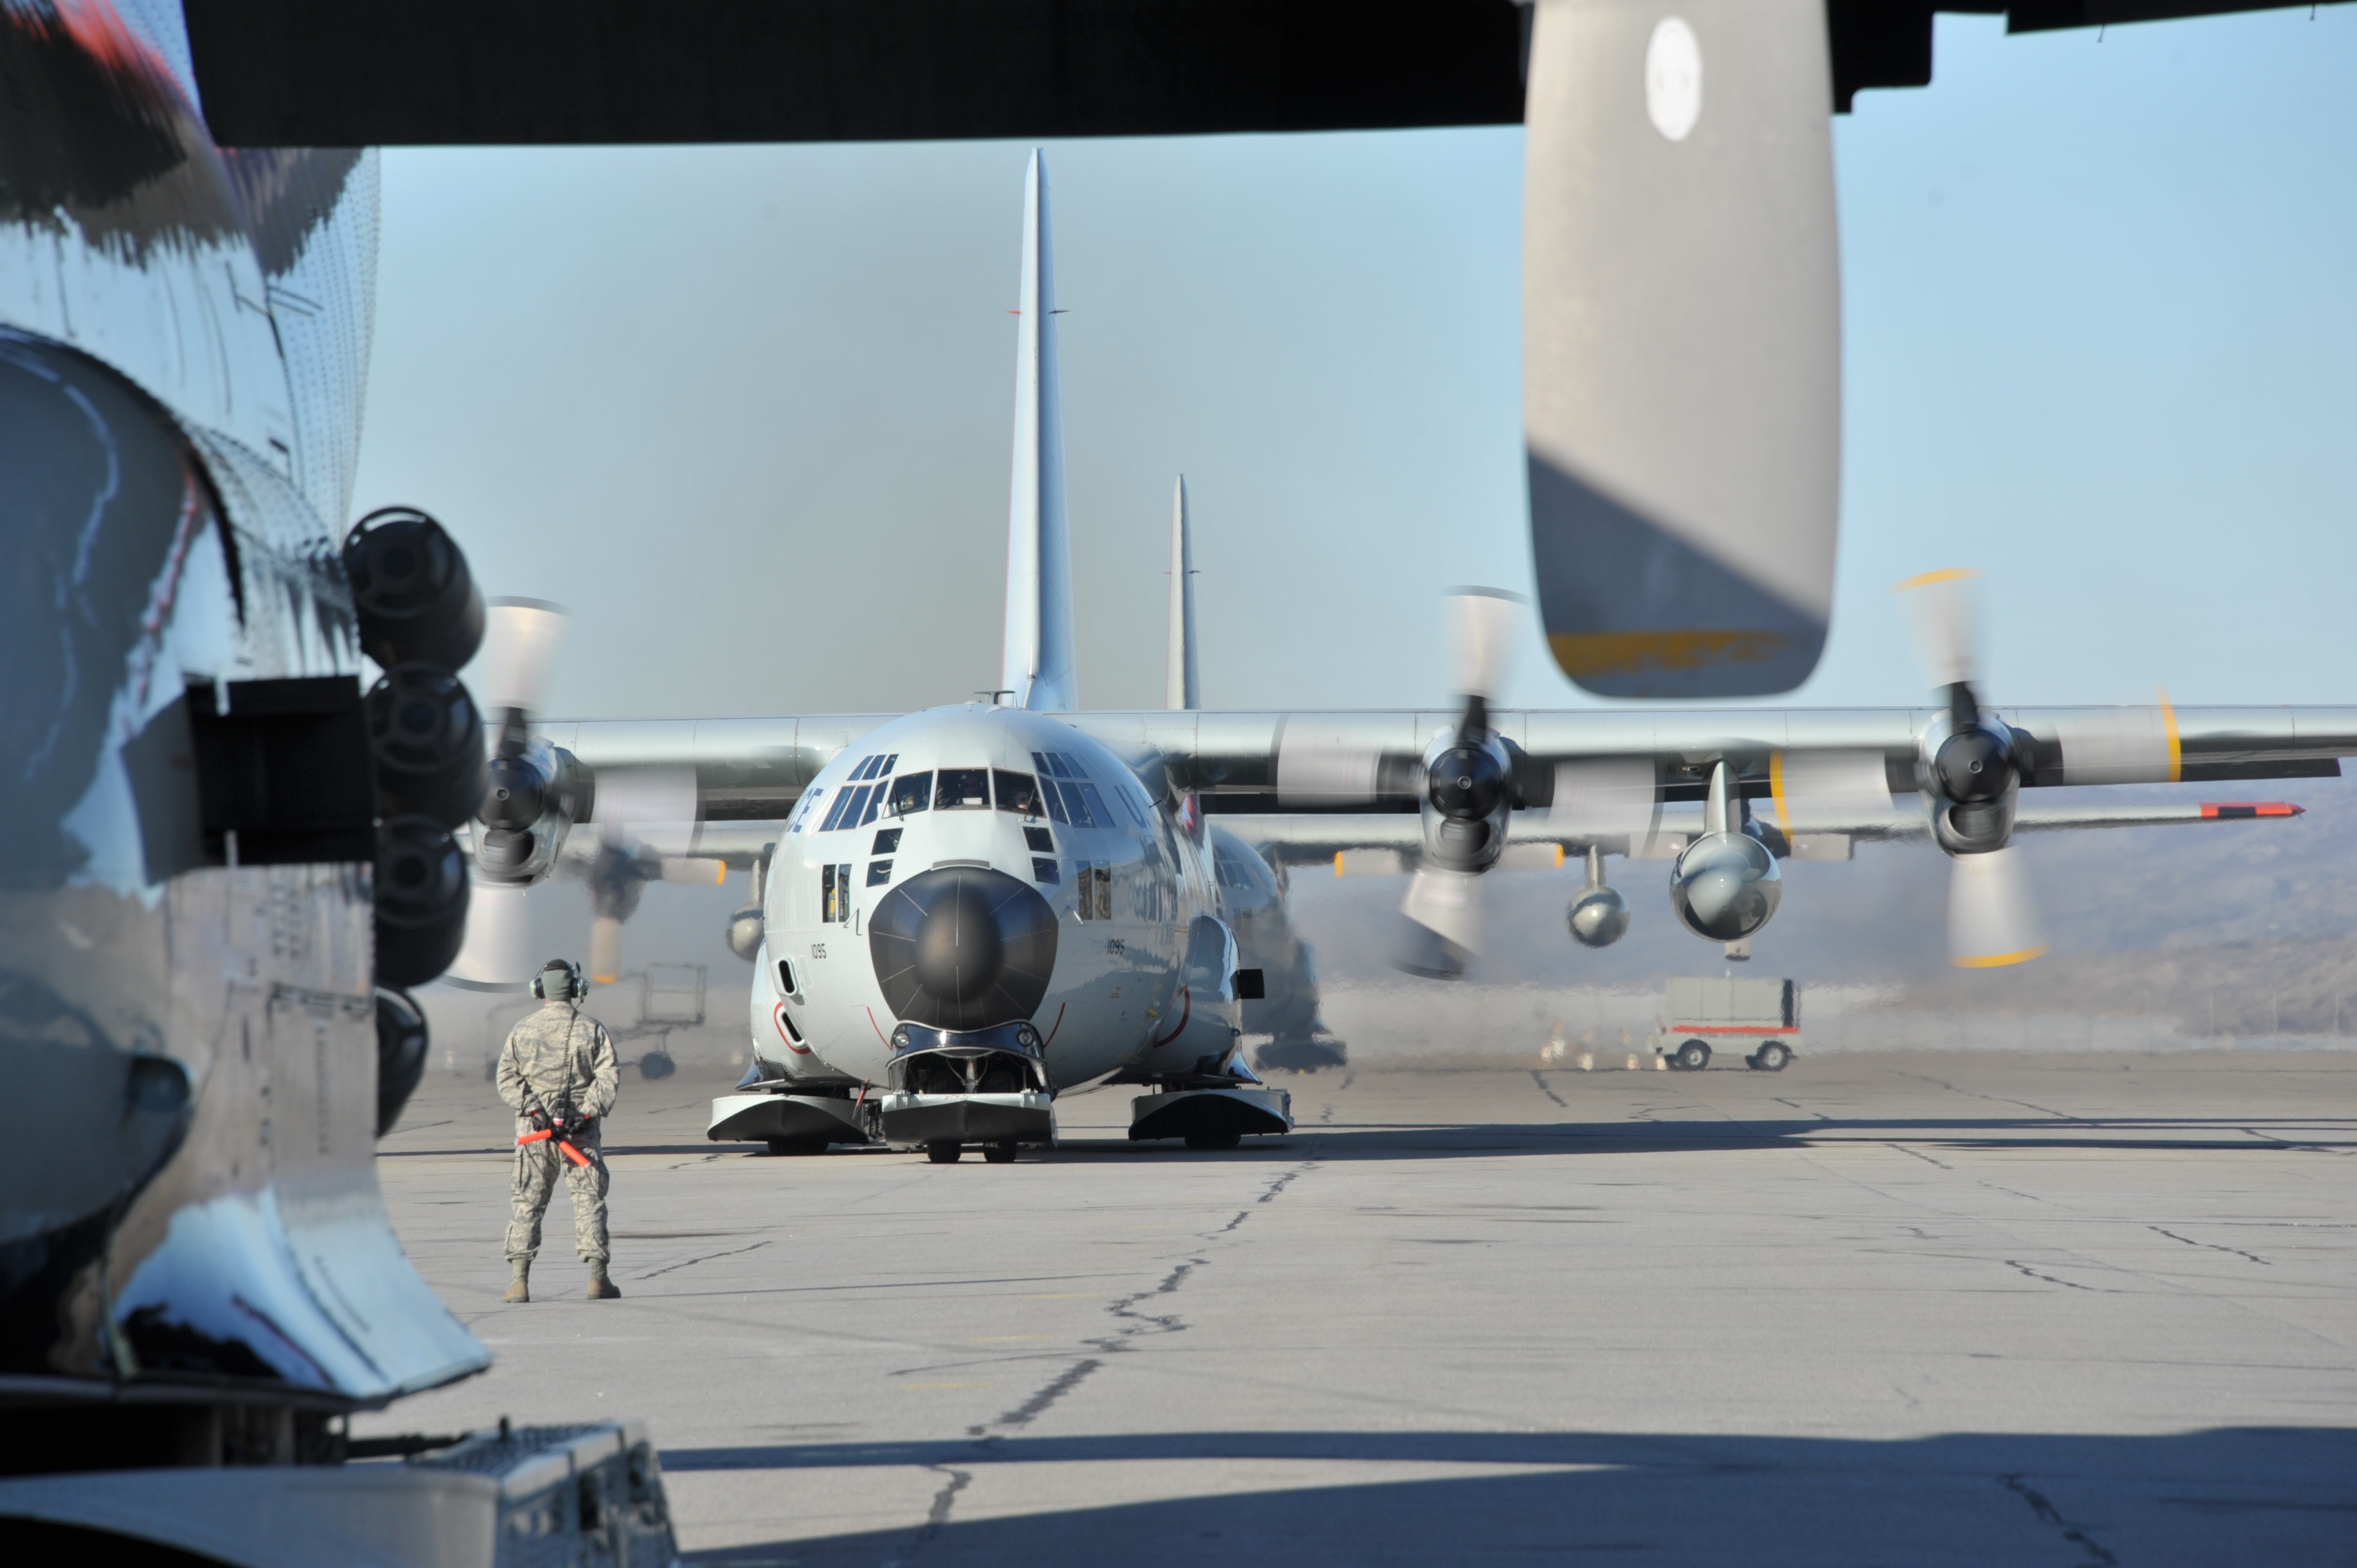 Ski-equipped LC-130 Hercules getting ready for take-off in Kangerlussuaq airport.